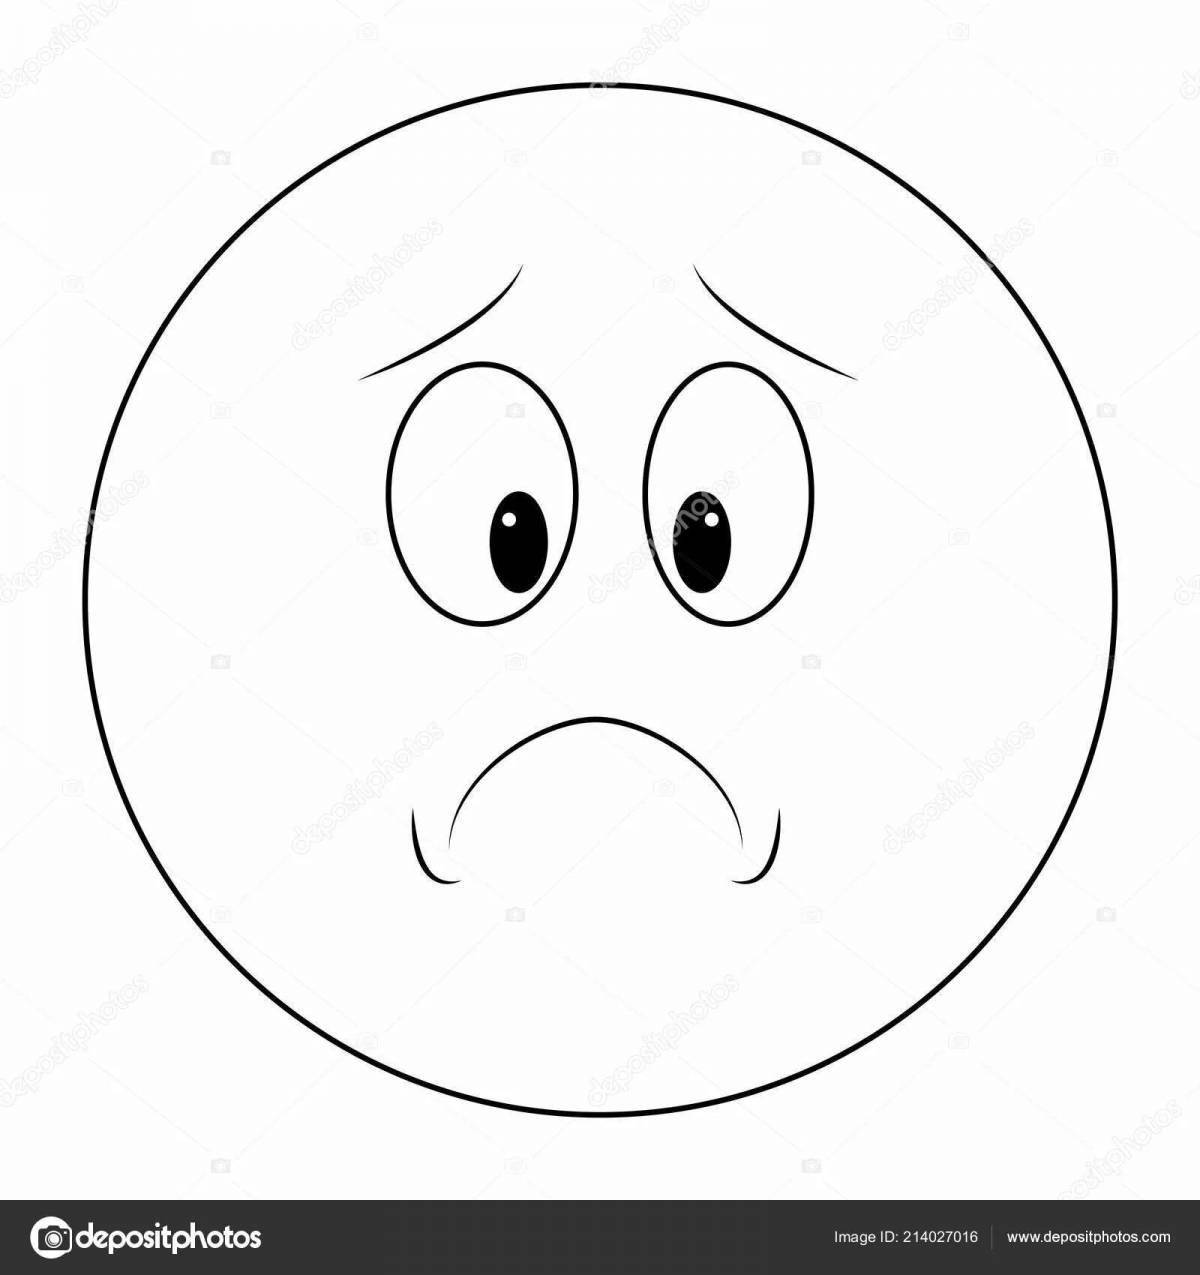 Animated sad and happy smiley coloring page